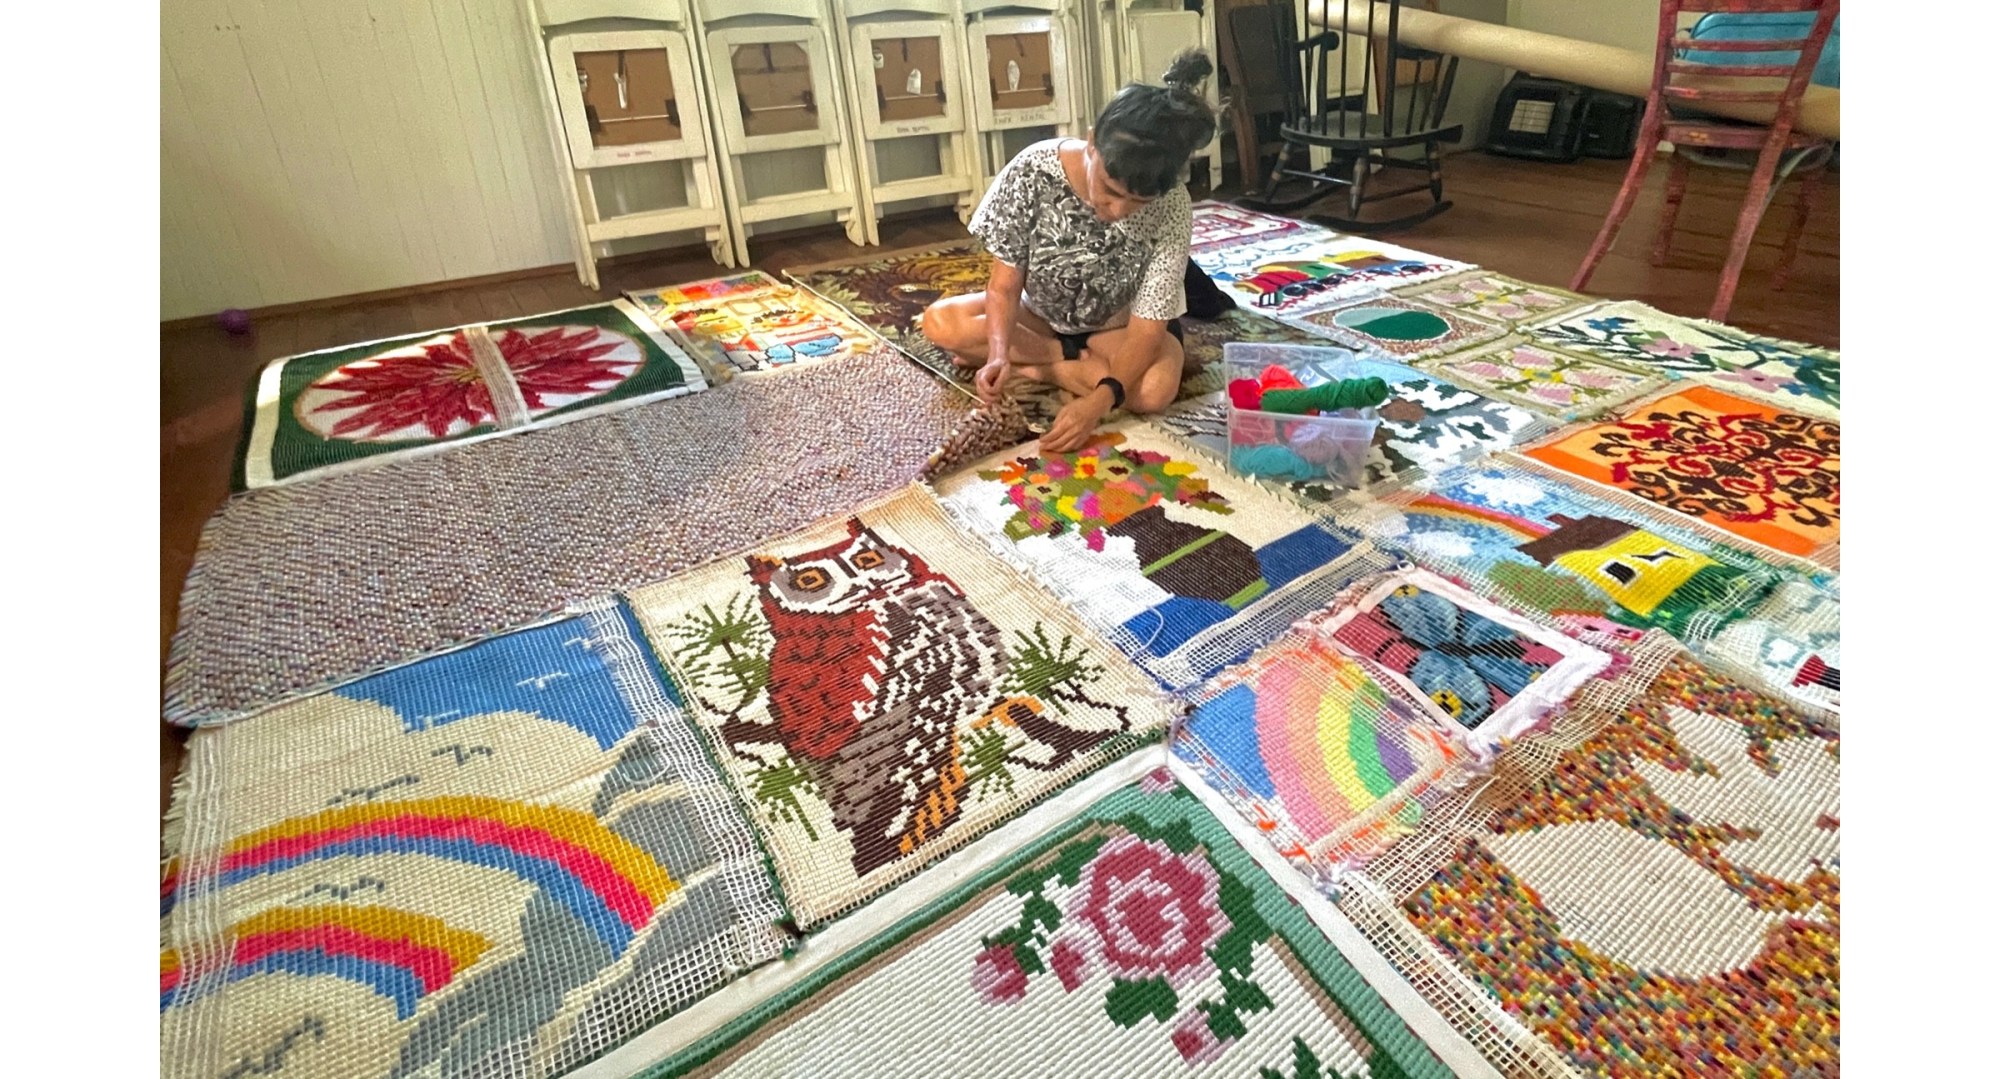 Jacinta Bunnell building a large 3D structure out of latch hook rugs.